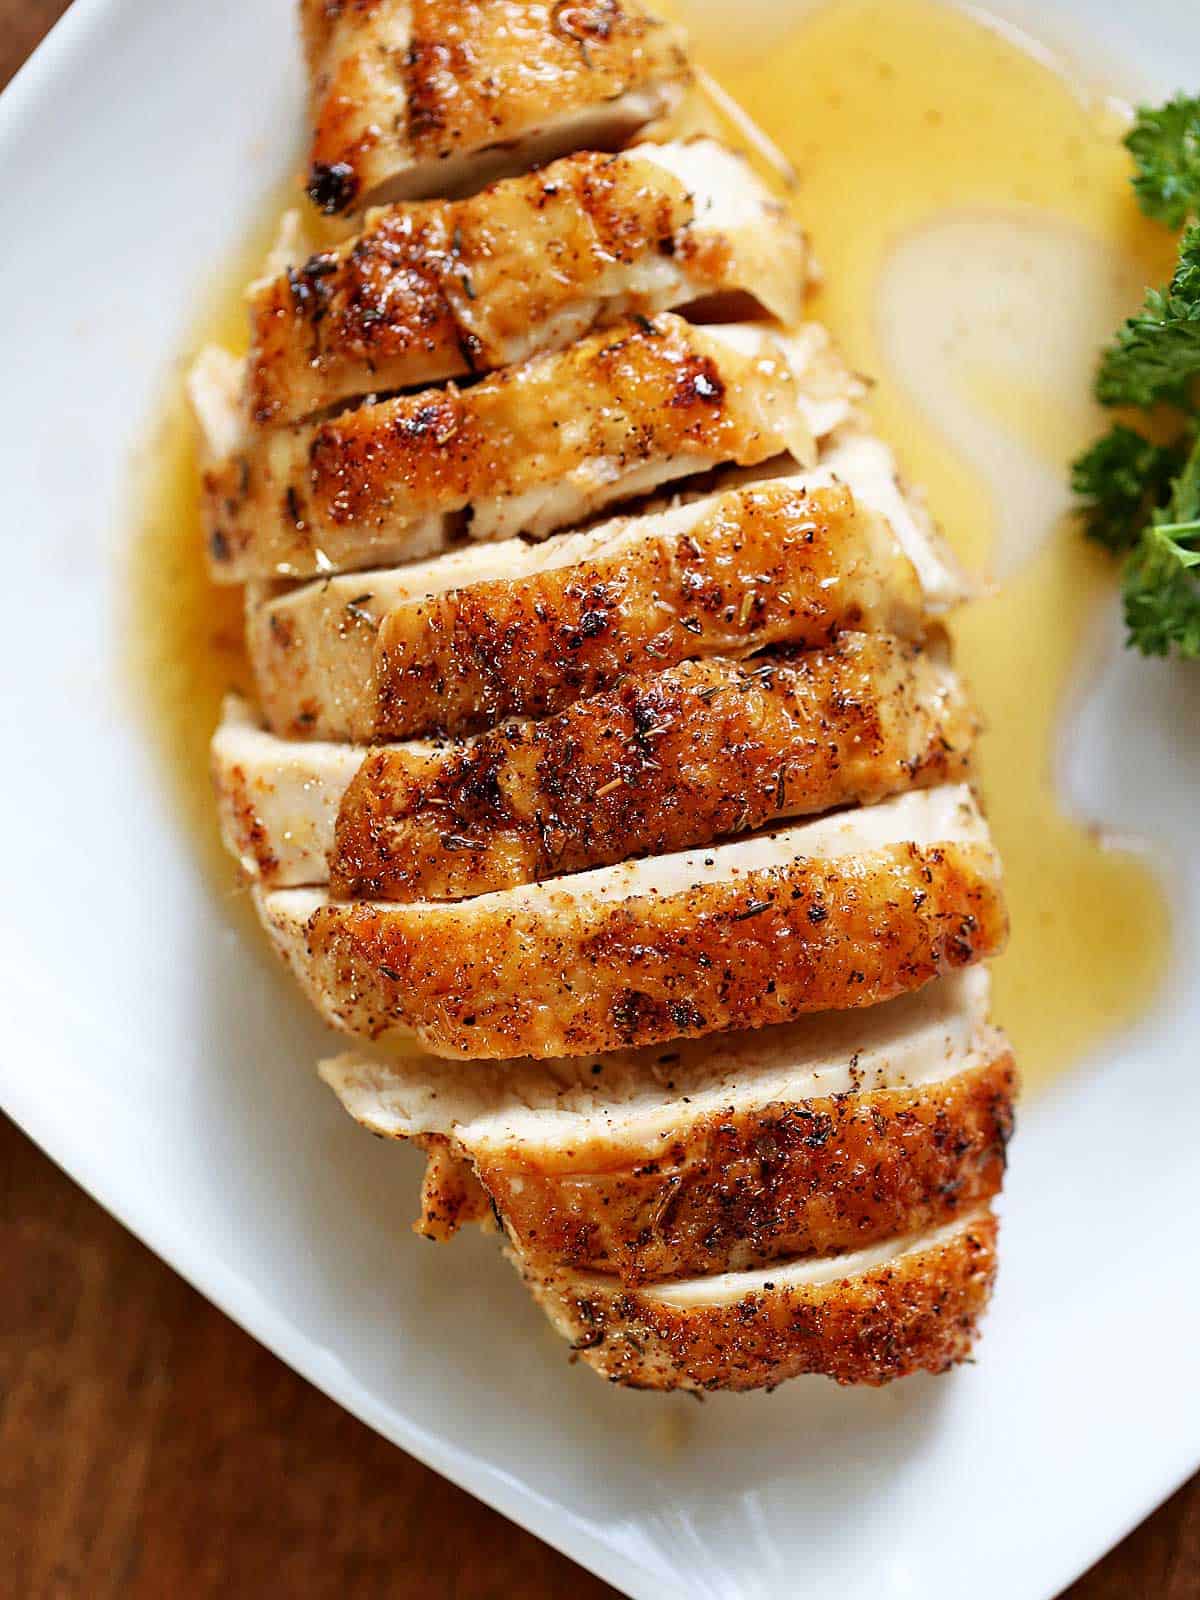 Skin-on chicken breast served on a white plate. 